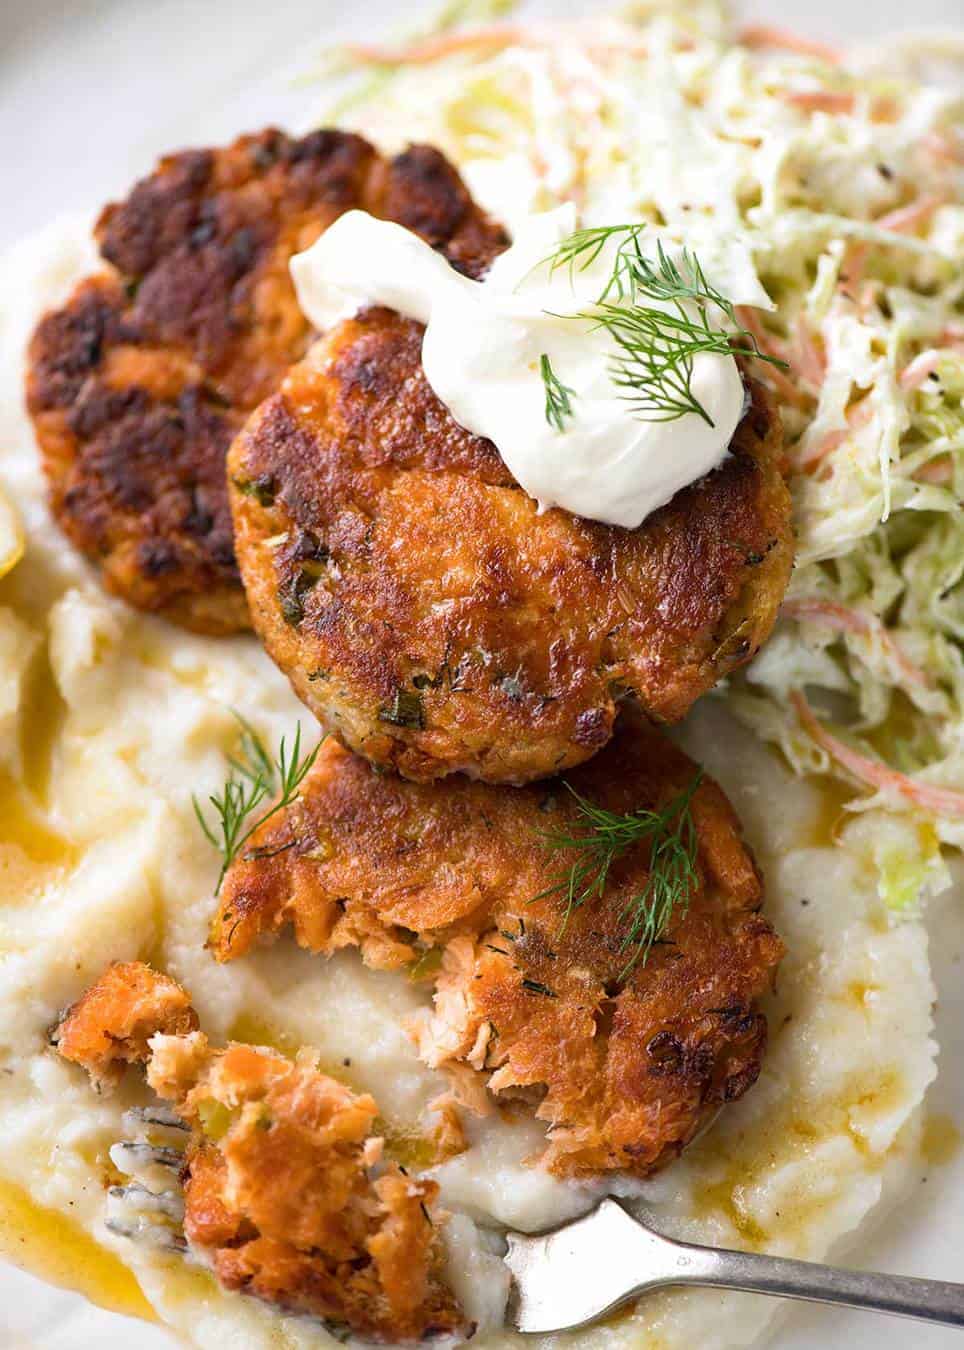 Tender insides studded with flakes of salmon, golden on the outside, these Salmon Patties are baked, not fried. Ultimate transformation of canned salmon - or use fresh! www.recipetineats.com